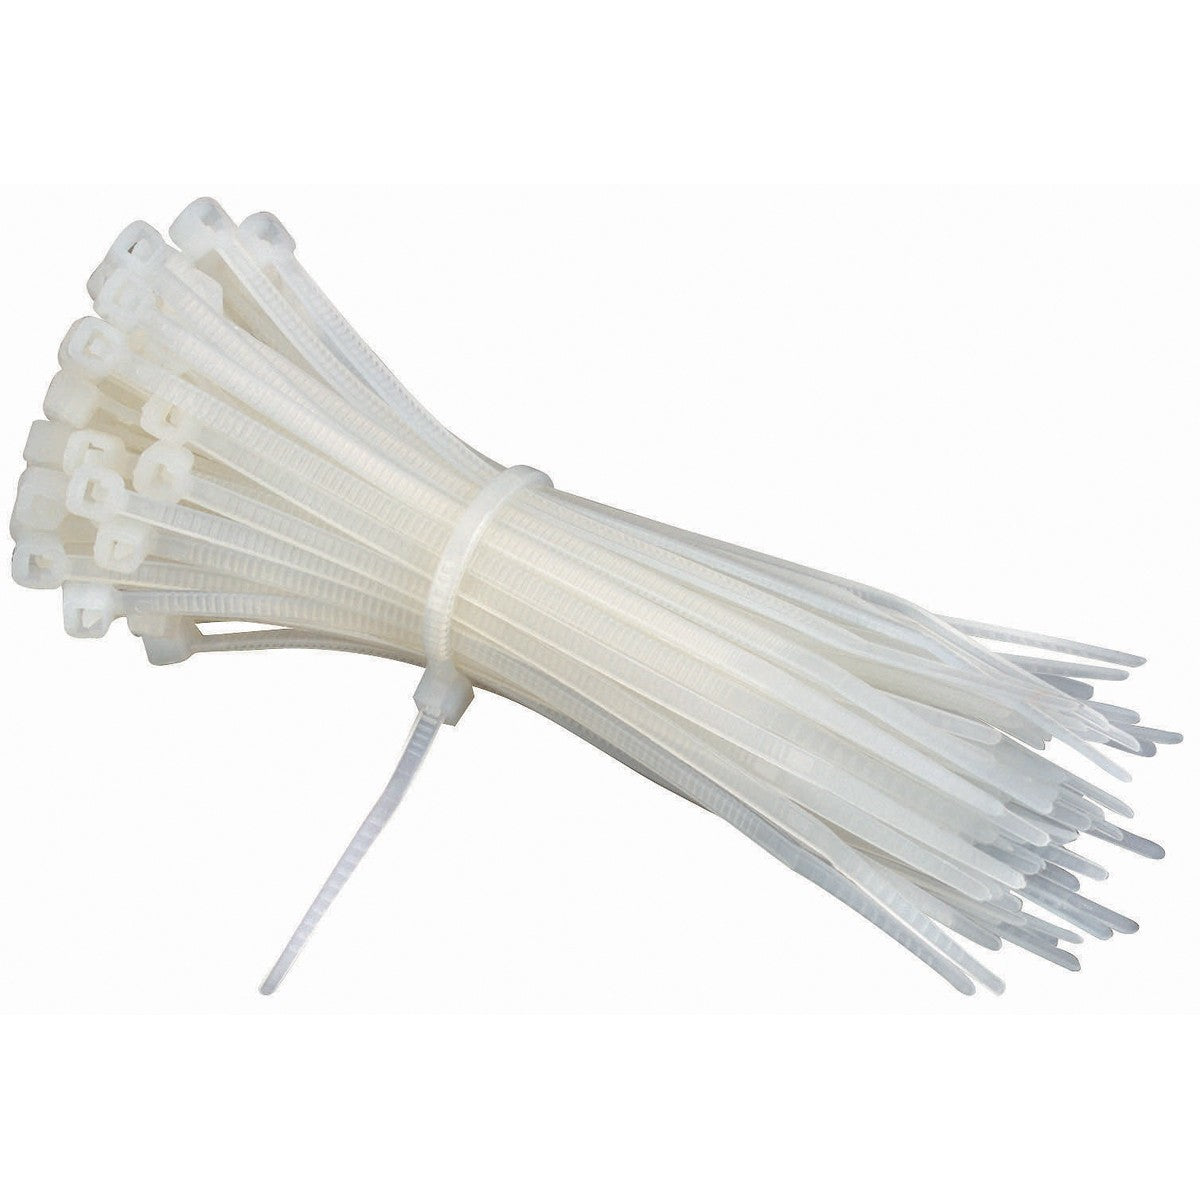 8 x 200mm - The Cable Tie Factory